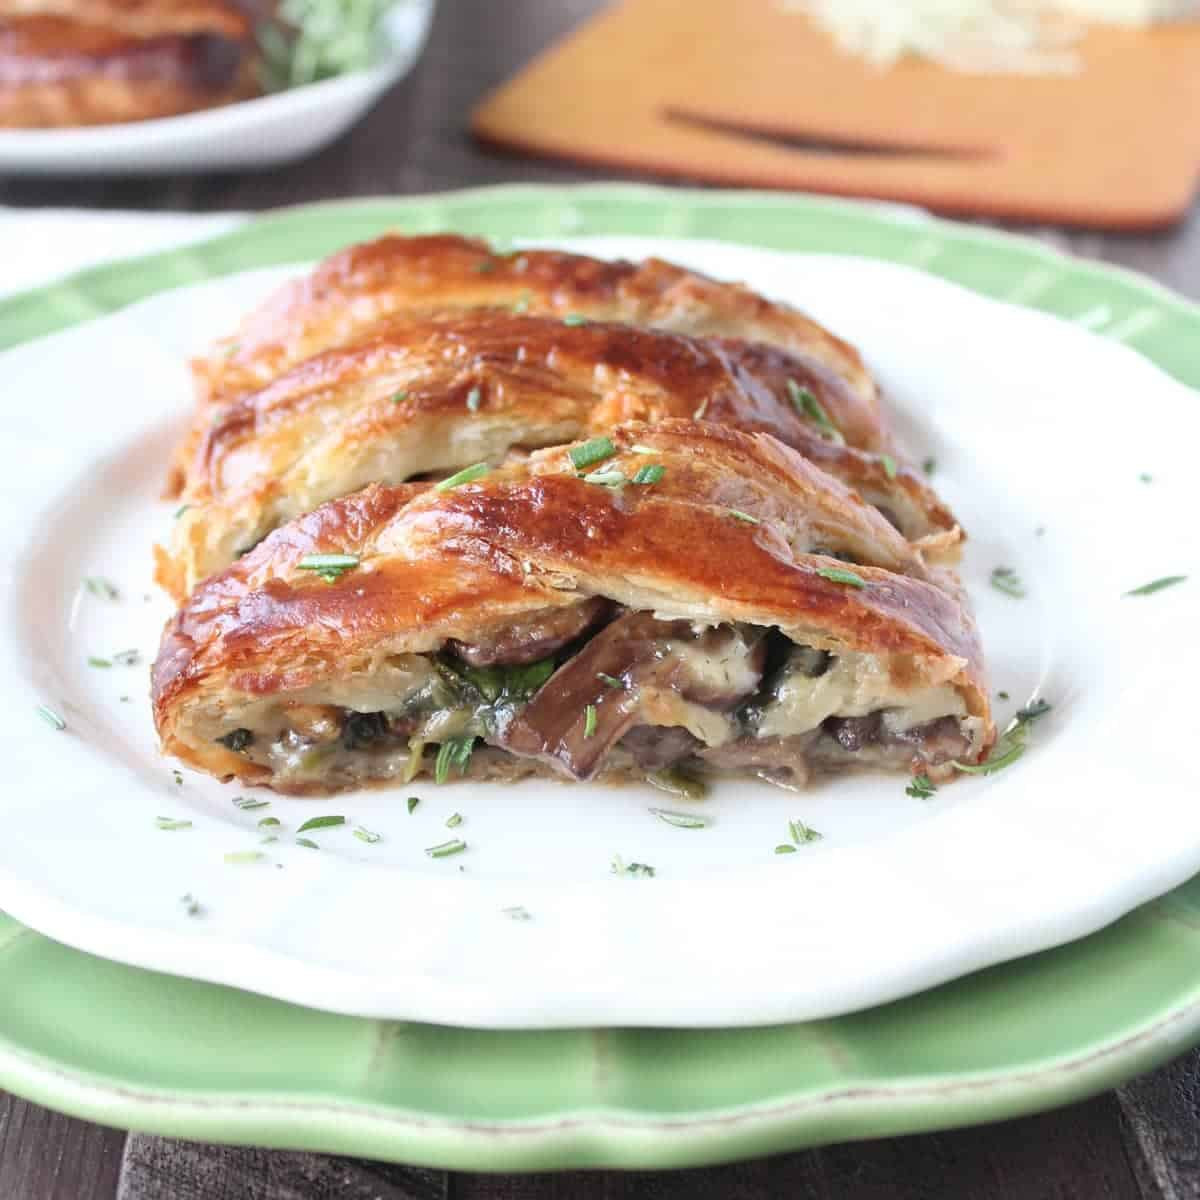 Puff Pastry Dinner Recipes
 Cheesy Mushroom Spinach Puff Pastry Recipe